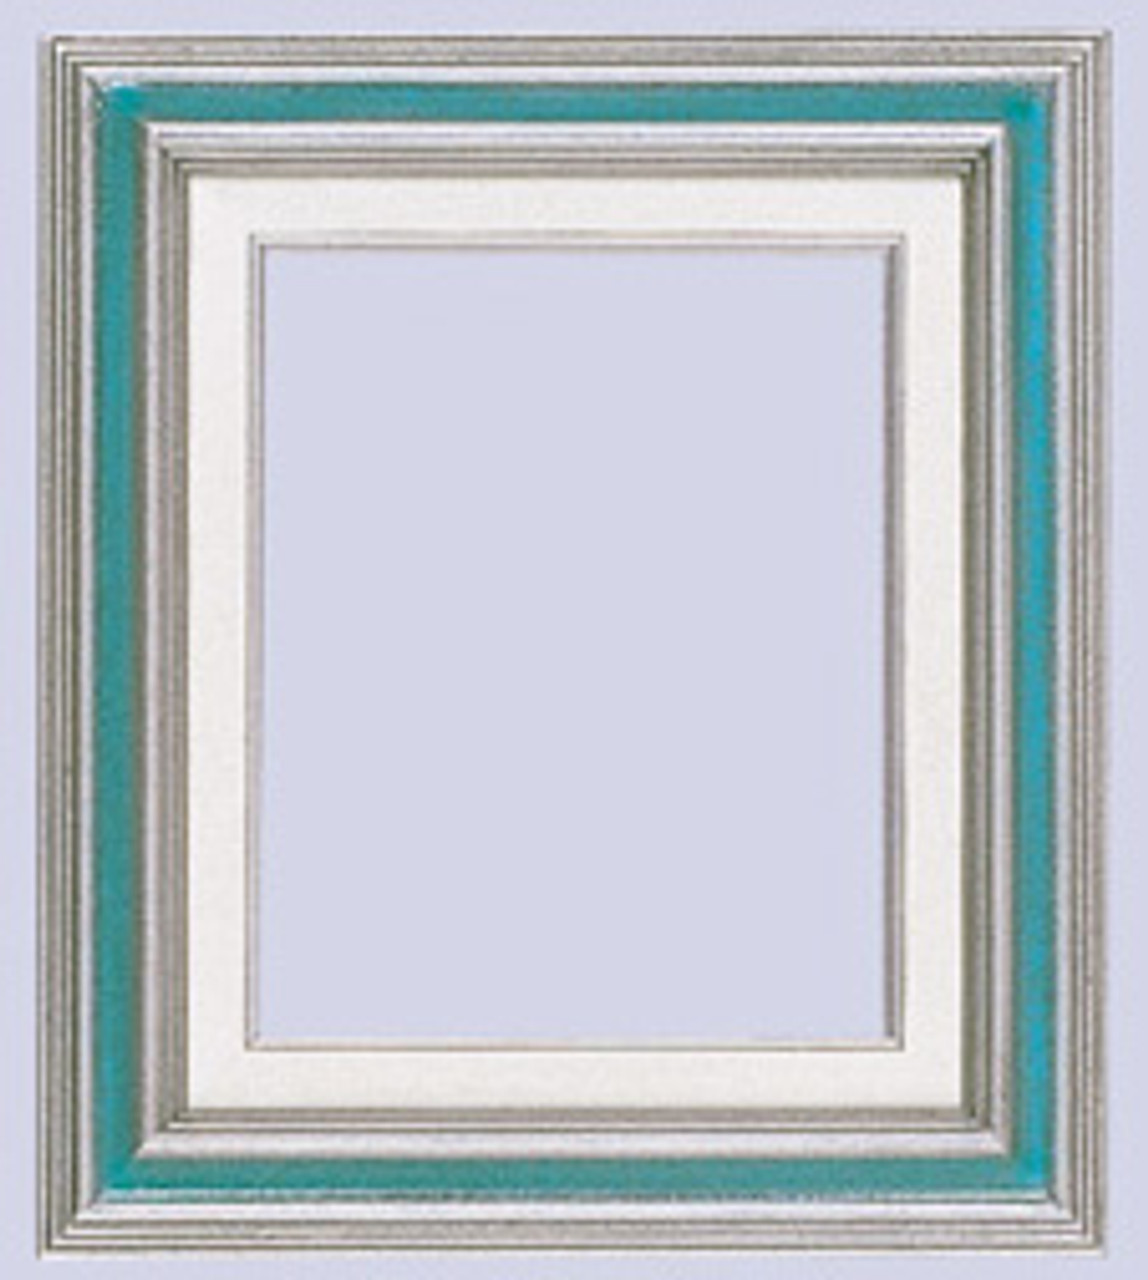 3 Inch Econo Wood Frames With Linen Liners: 12X36*